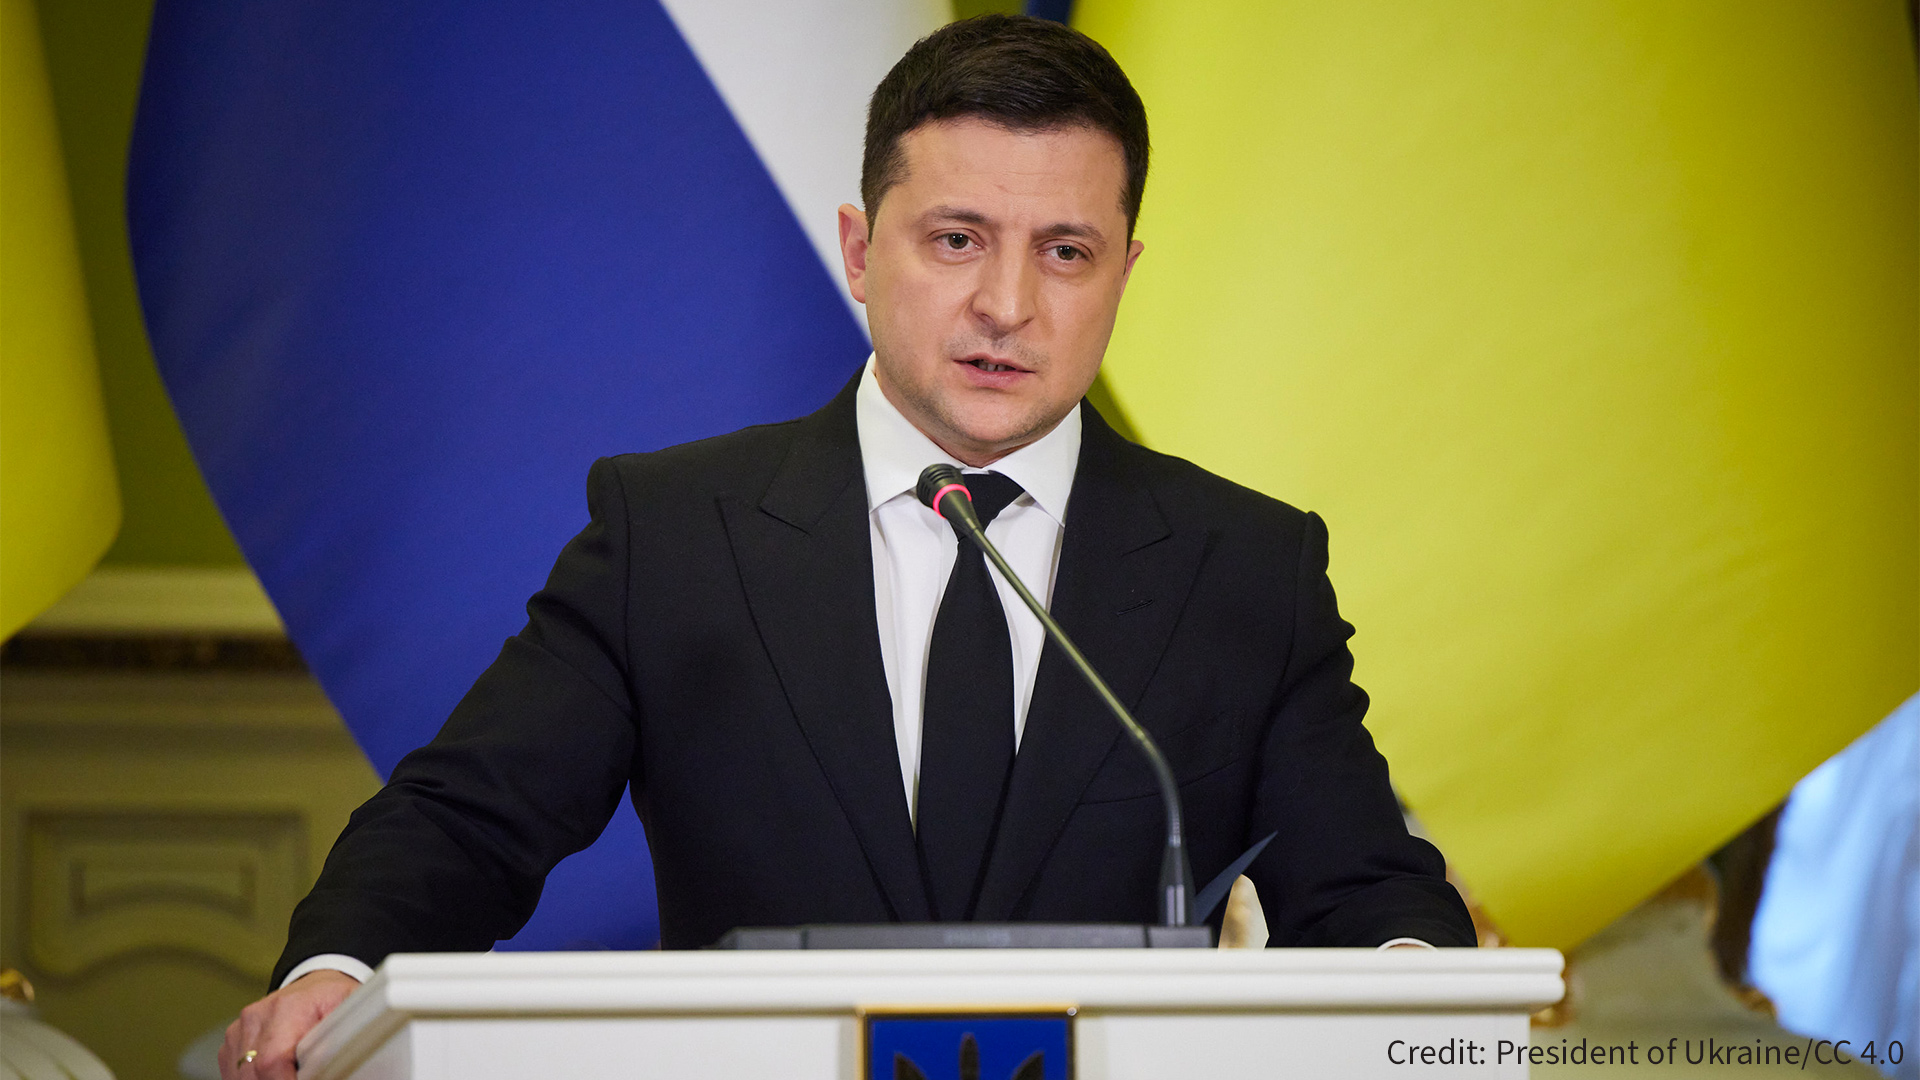 President Volodymyr Zelensky met with the Prime Minister of the Netherlands Mark Rutte, in the Mariinskyi Palace, Kyiv on February 2, 2022.